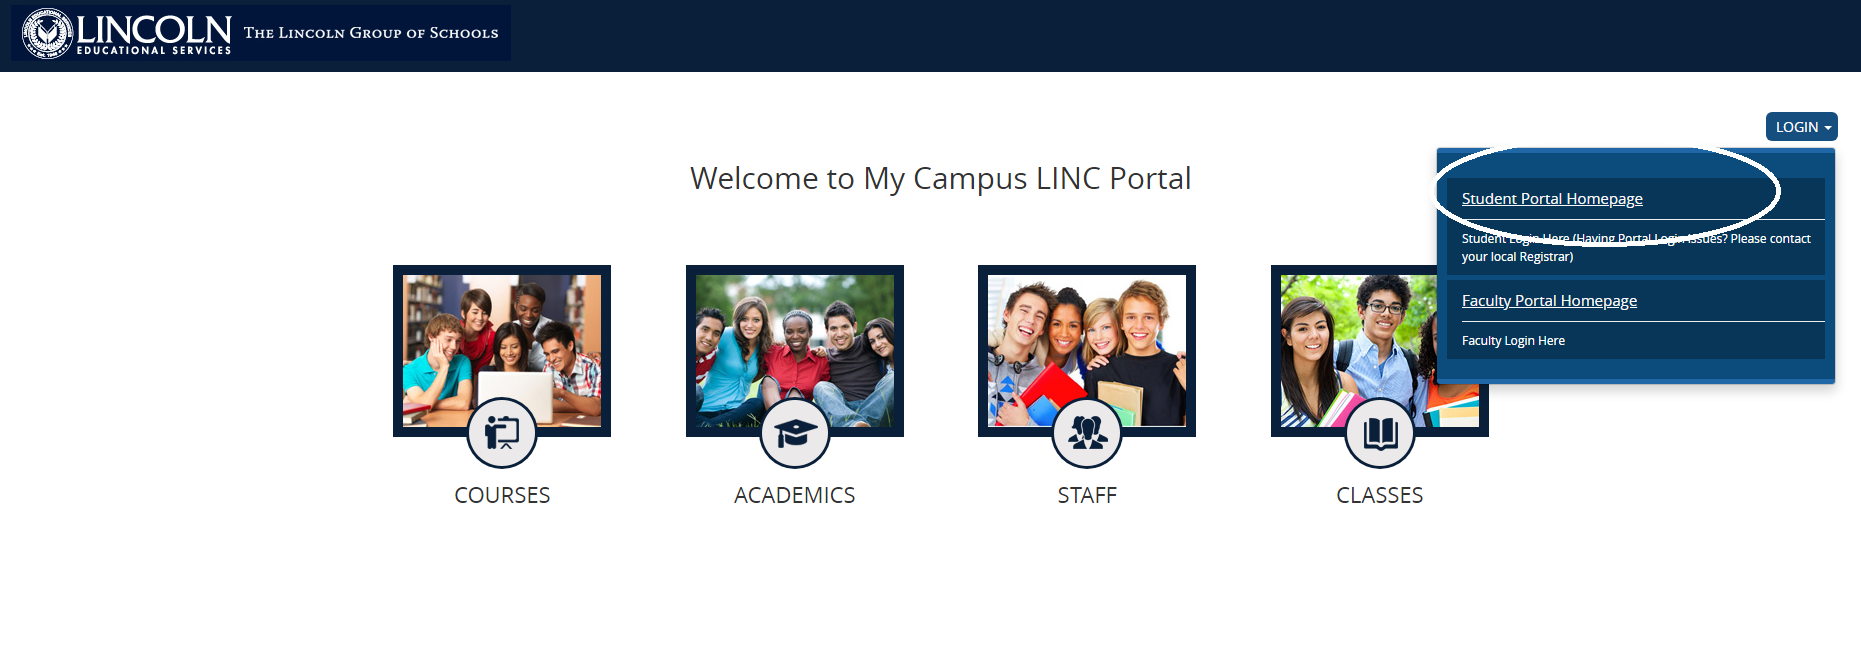 click on student portal homepage in myportal lincolnedu